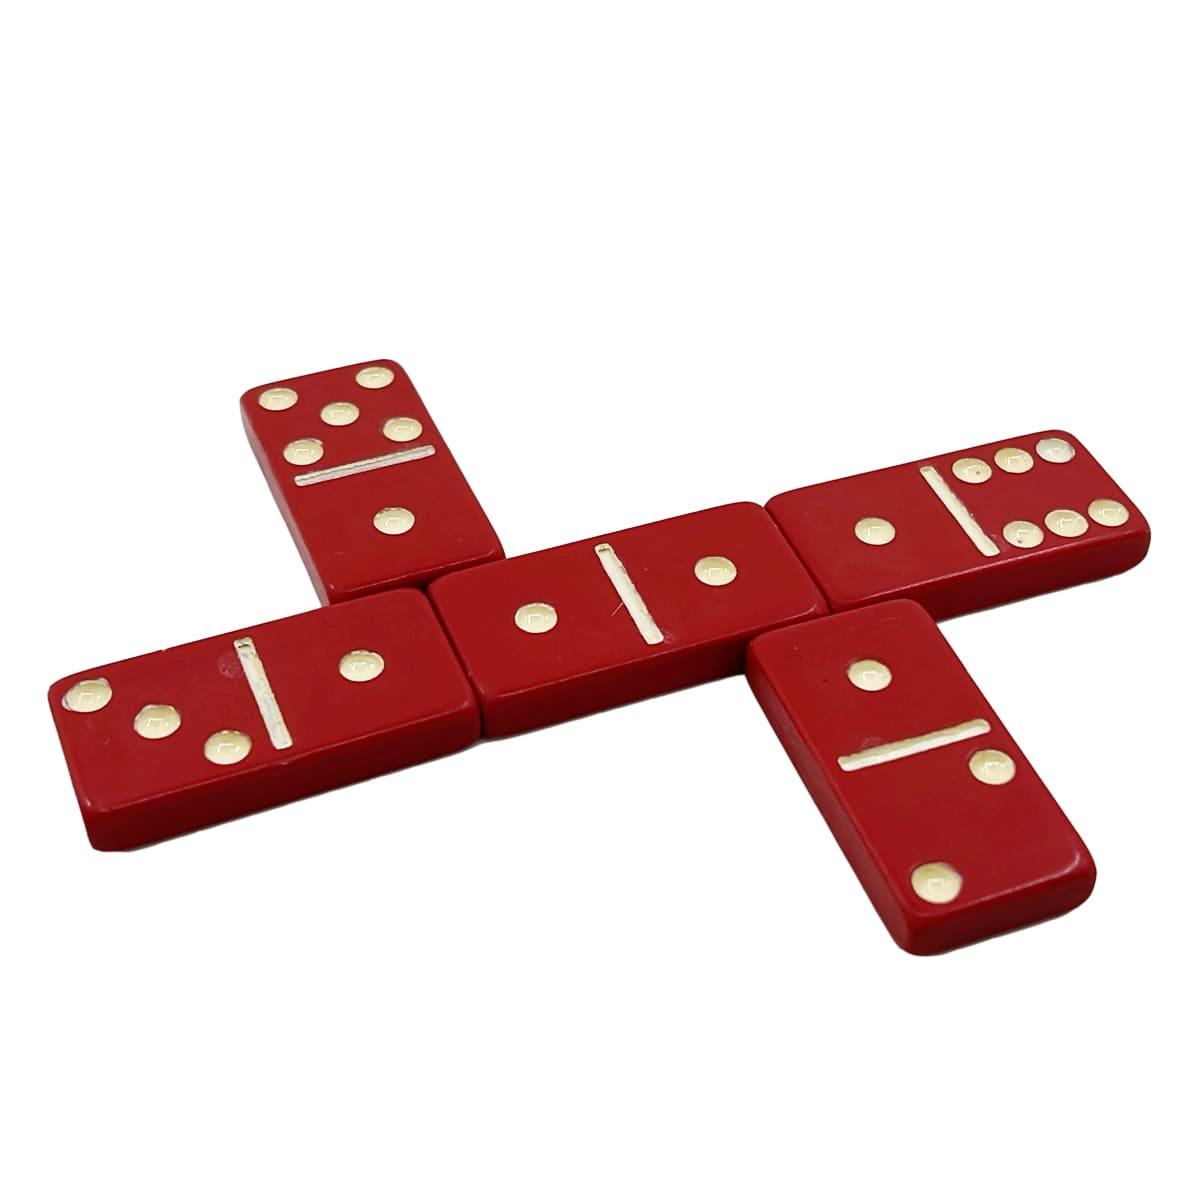 D6 Double Six Red Domino Tiles